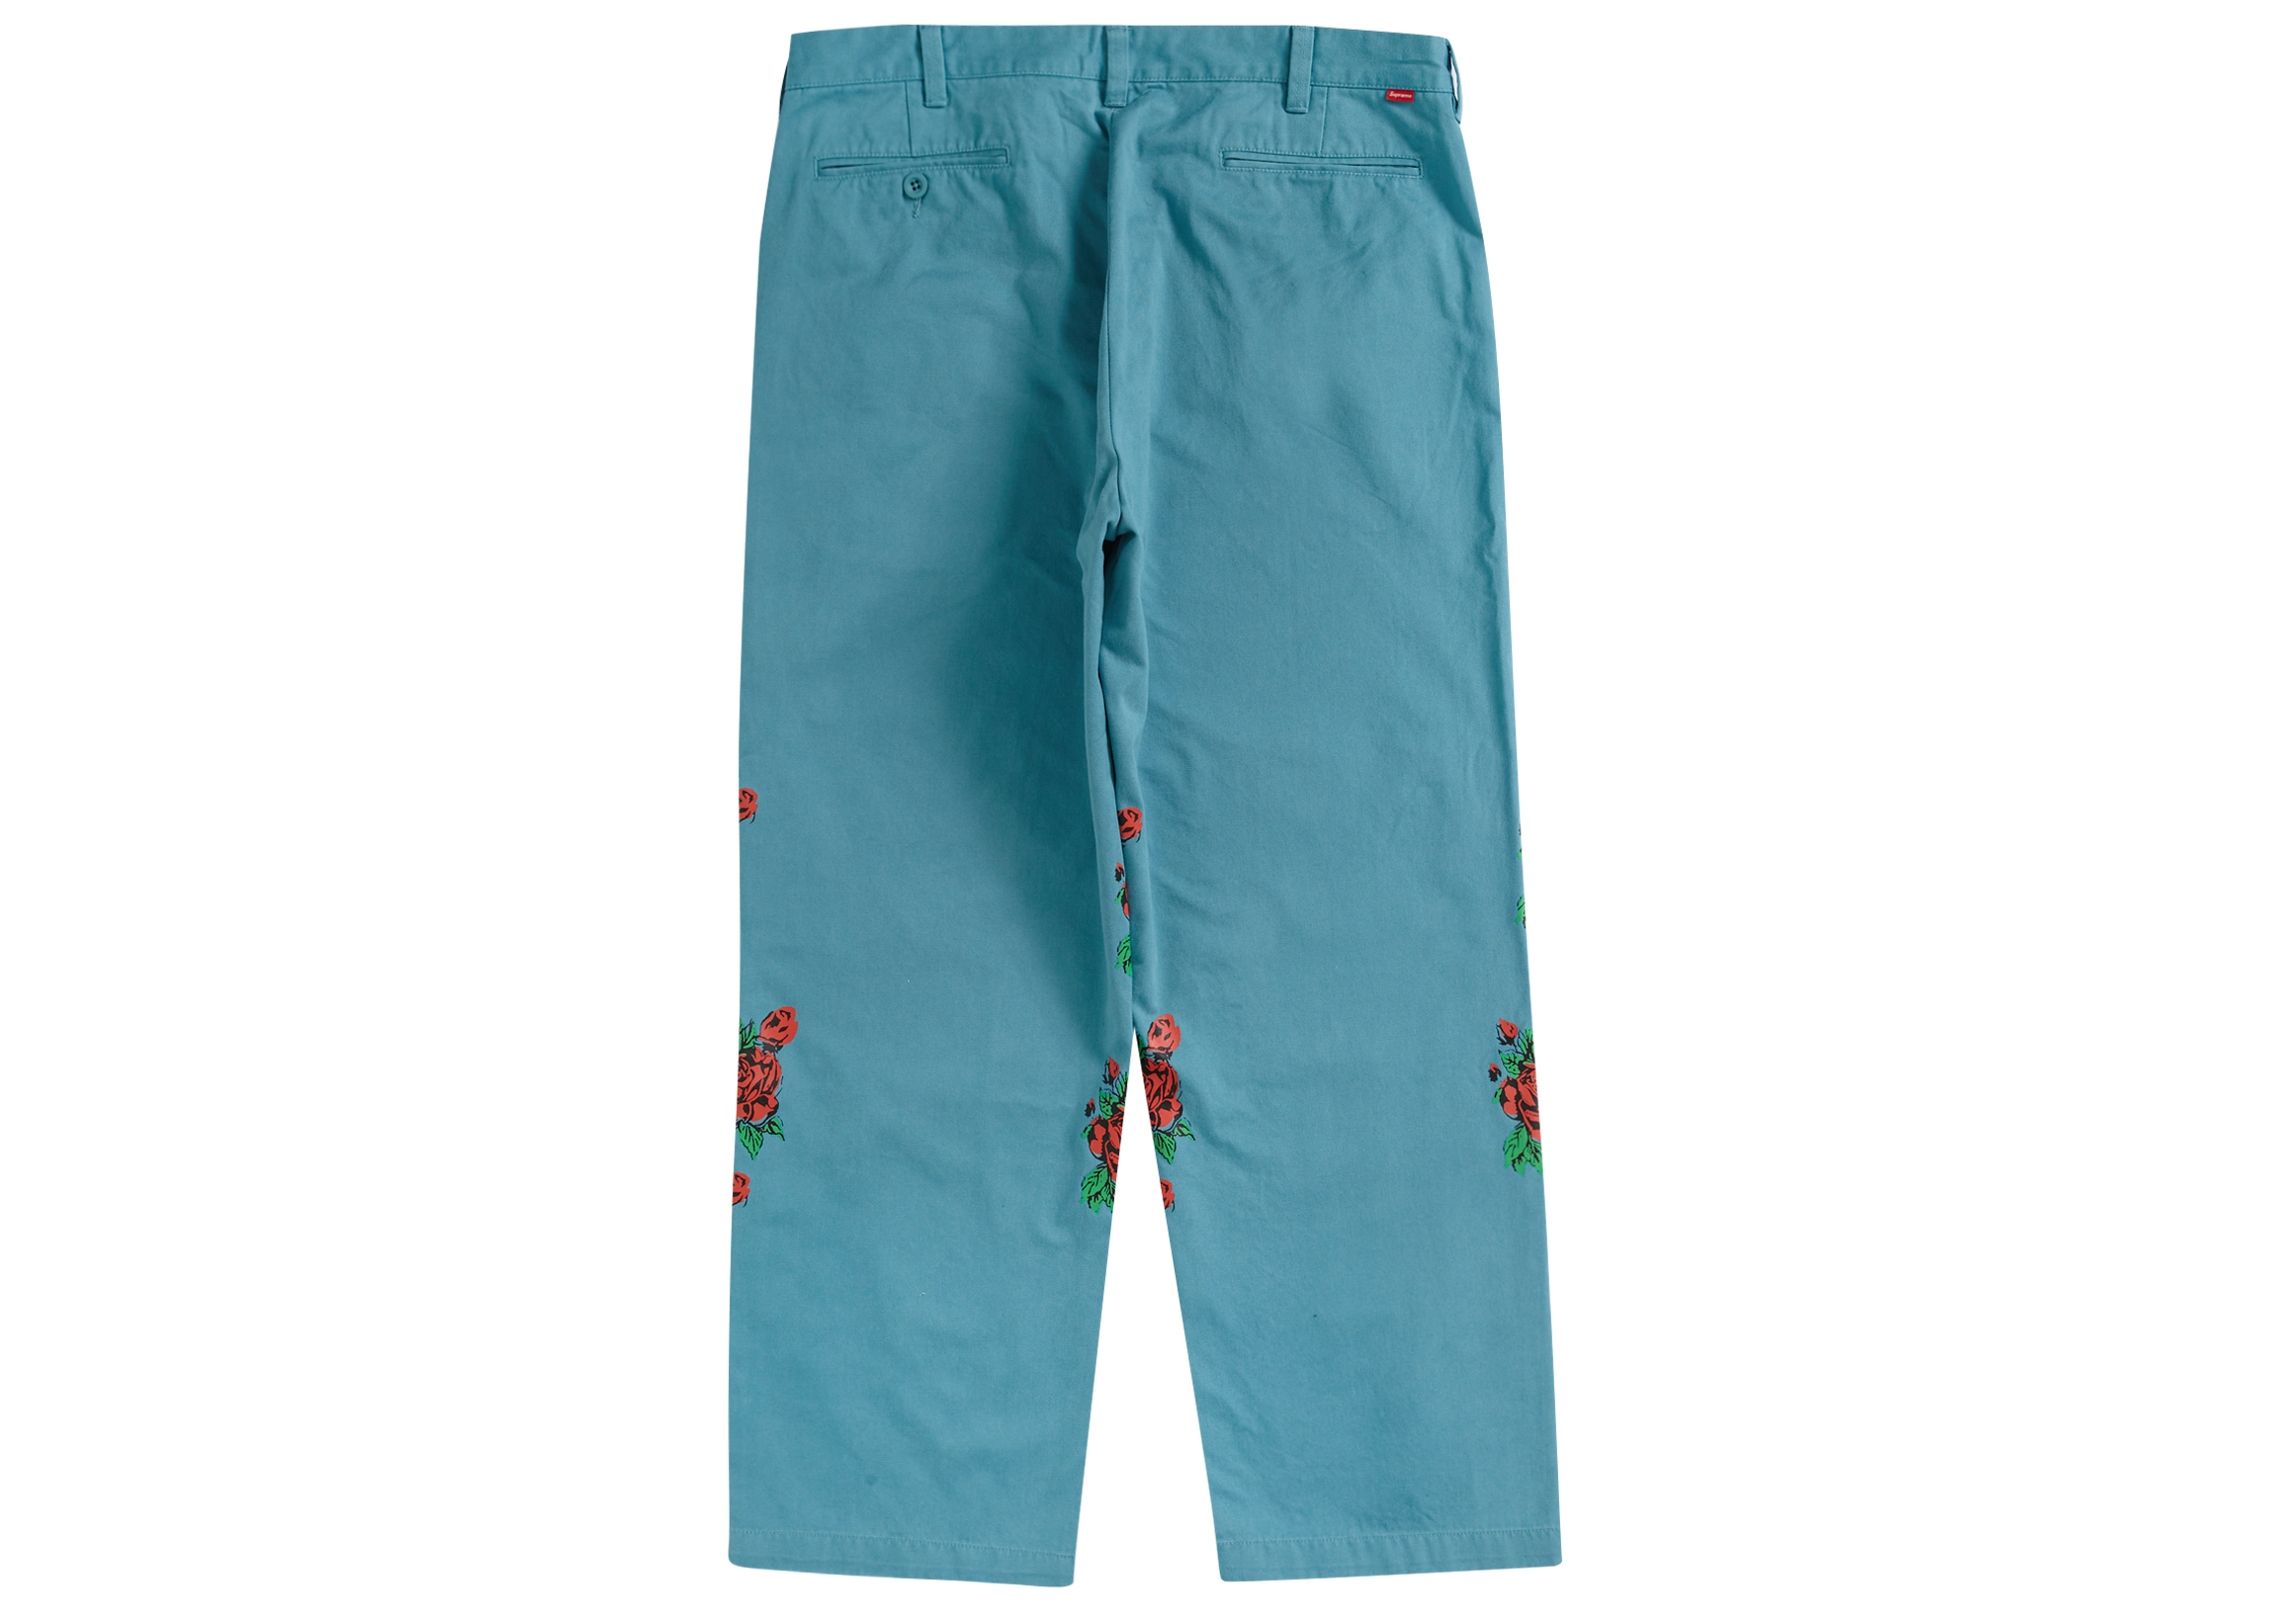 Supreme Destruction of Purity Chino Pant Teal Men's - SS23 - US